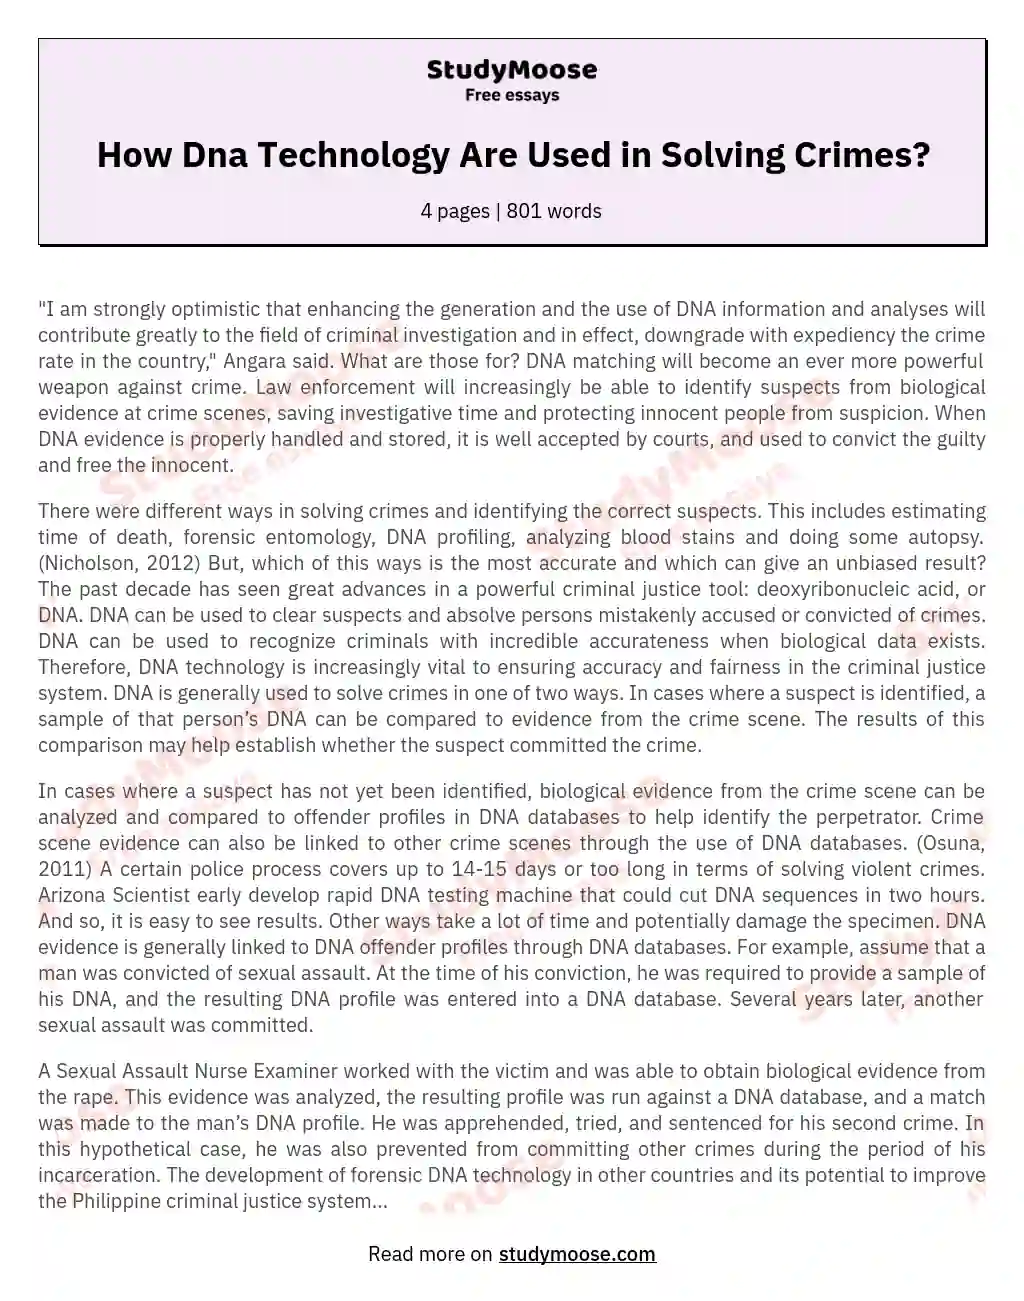 How Dna Technology Are Used in Solving Crimes? essay